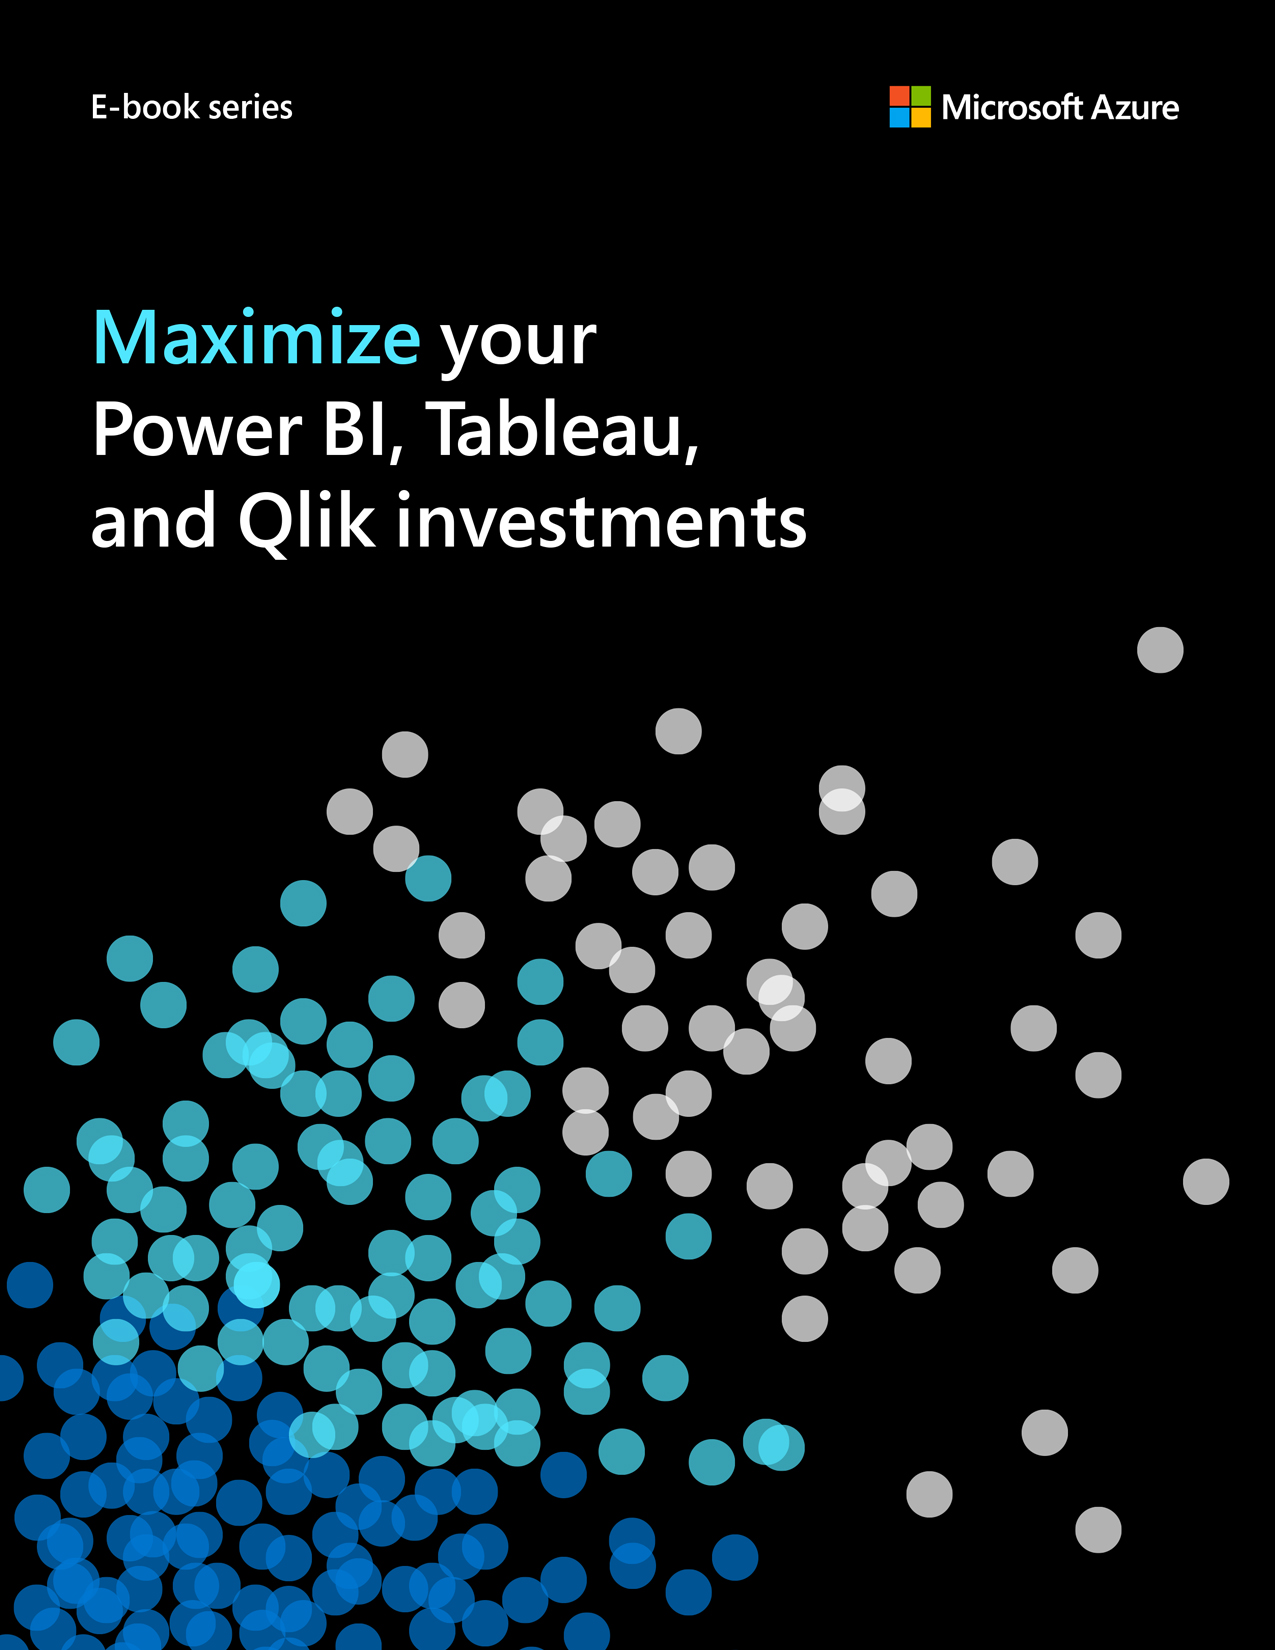 Maximize your Power BI, Tableau and Qlik investments